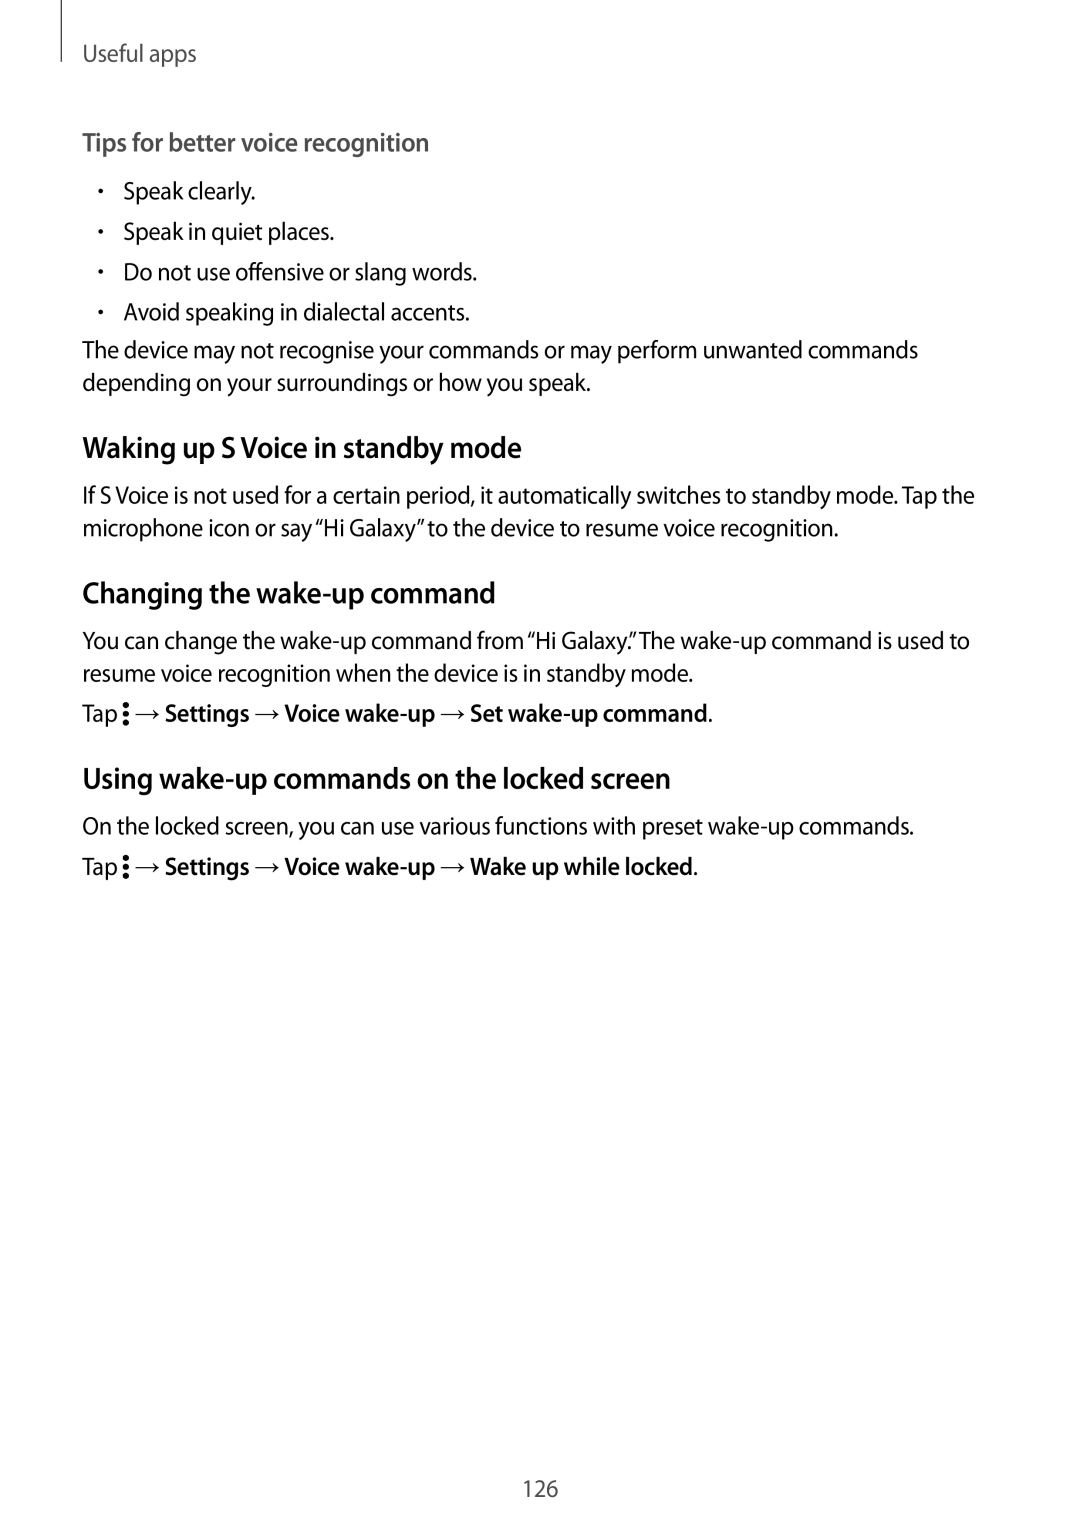 Samsung SM-N915FZWYTPH Waking up S Voice in standby mode, Changing the wake-up command, Tips for better voice recognition 